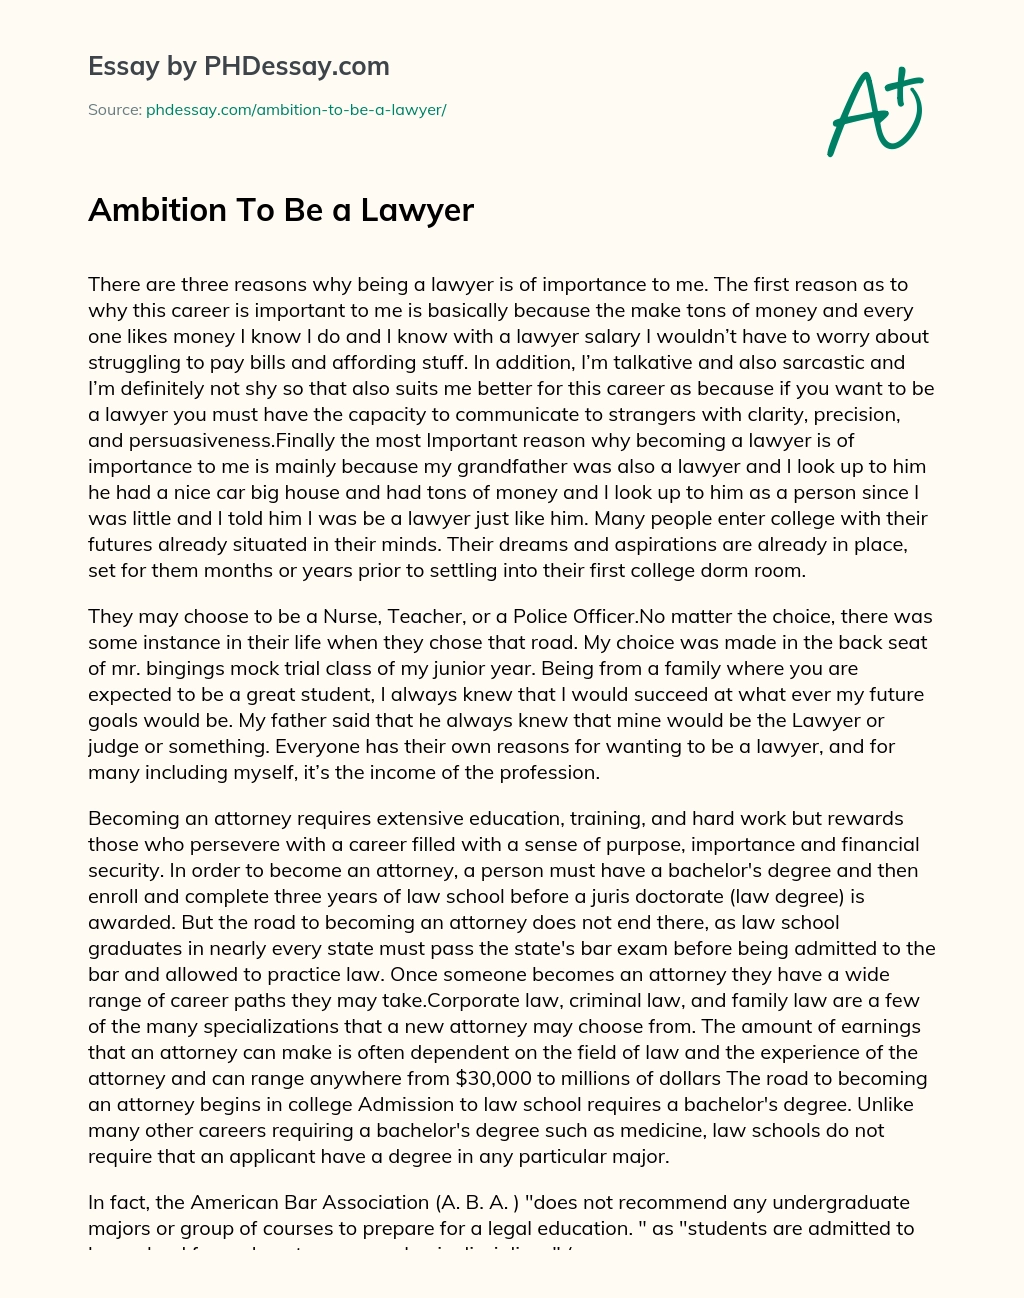 Ambition To Be a Lawyer essay